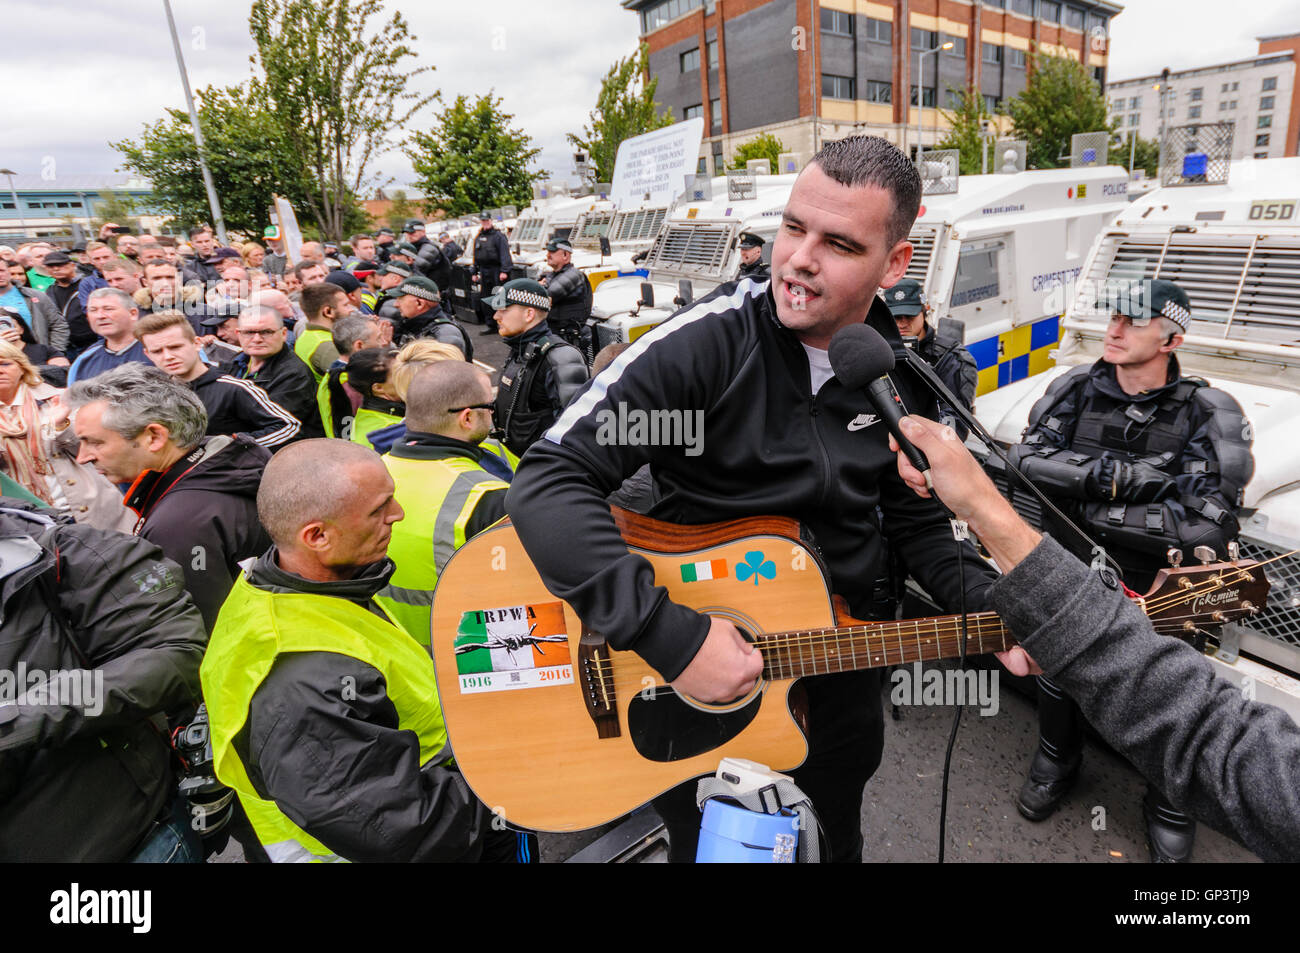 A man sings 'The Men Behind the Wire' at an Irish Republican protest after they were prevented from proceeding along a road. Stock Photo